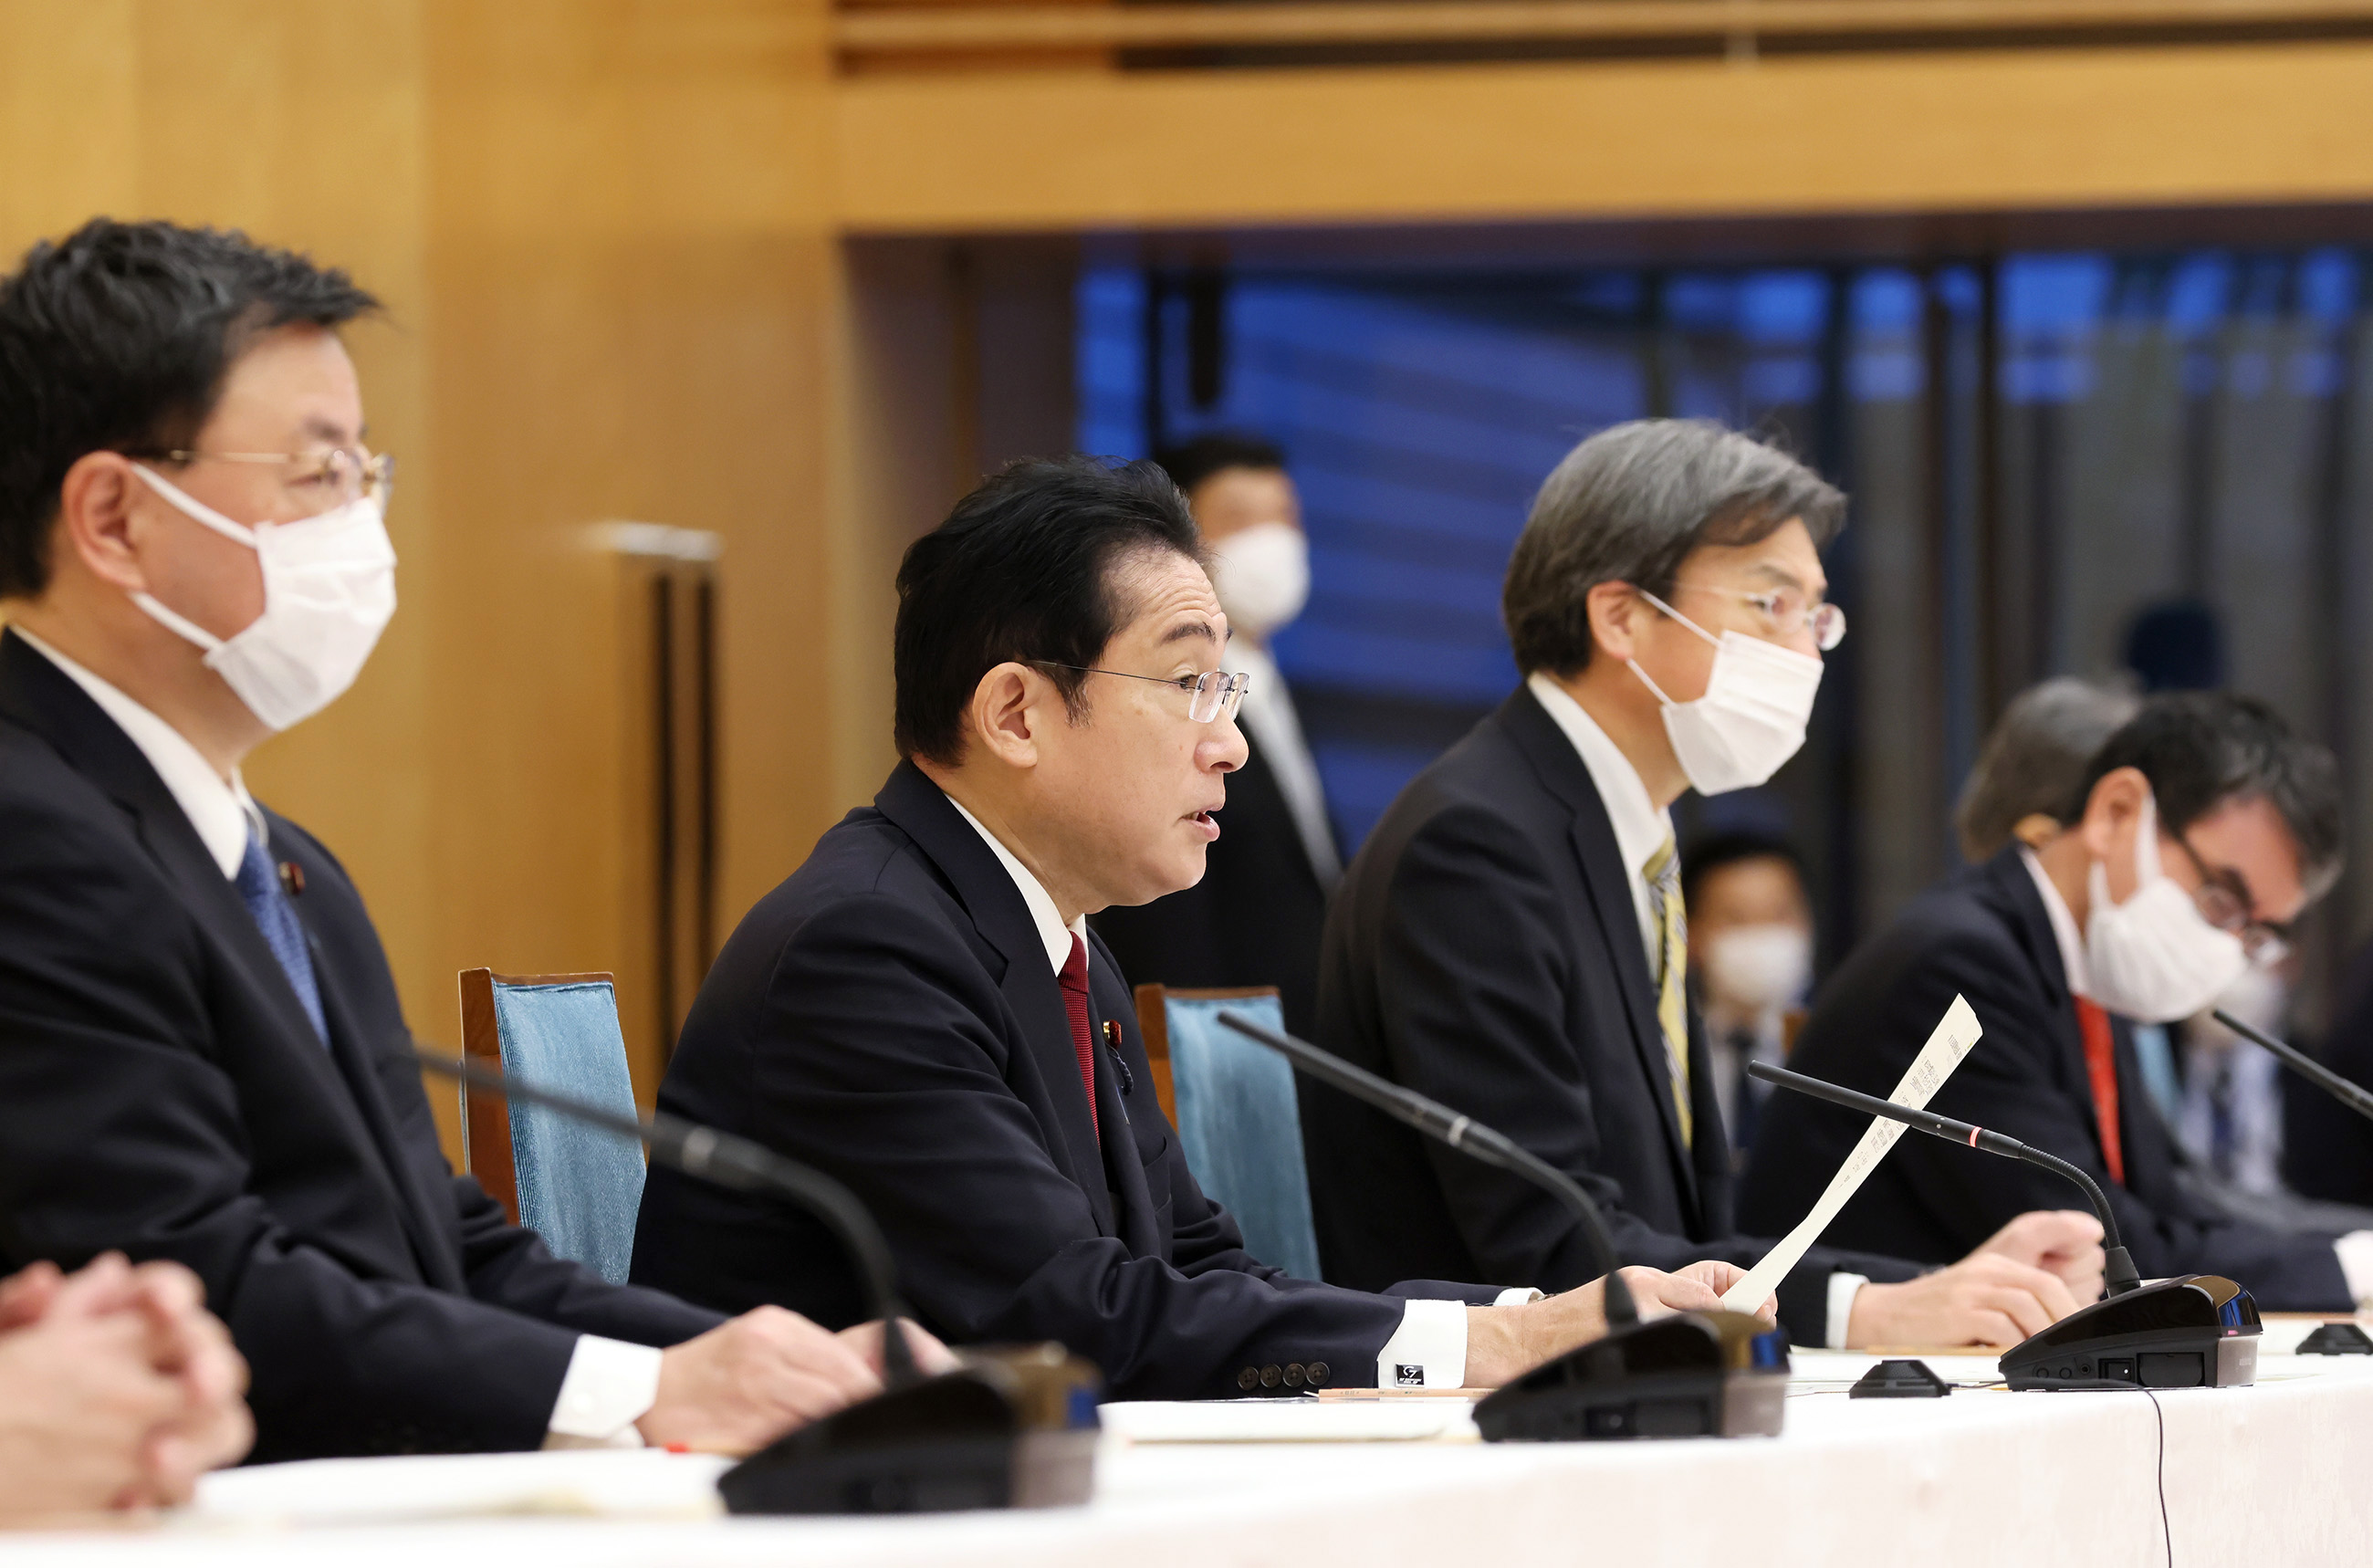 Prime Minister Kishida wrapping up a meeting (1)